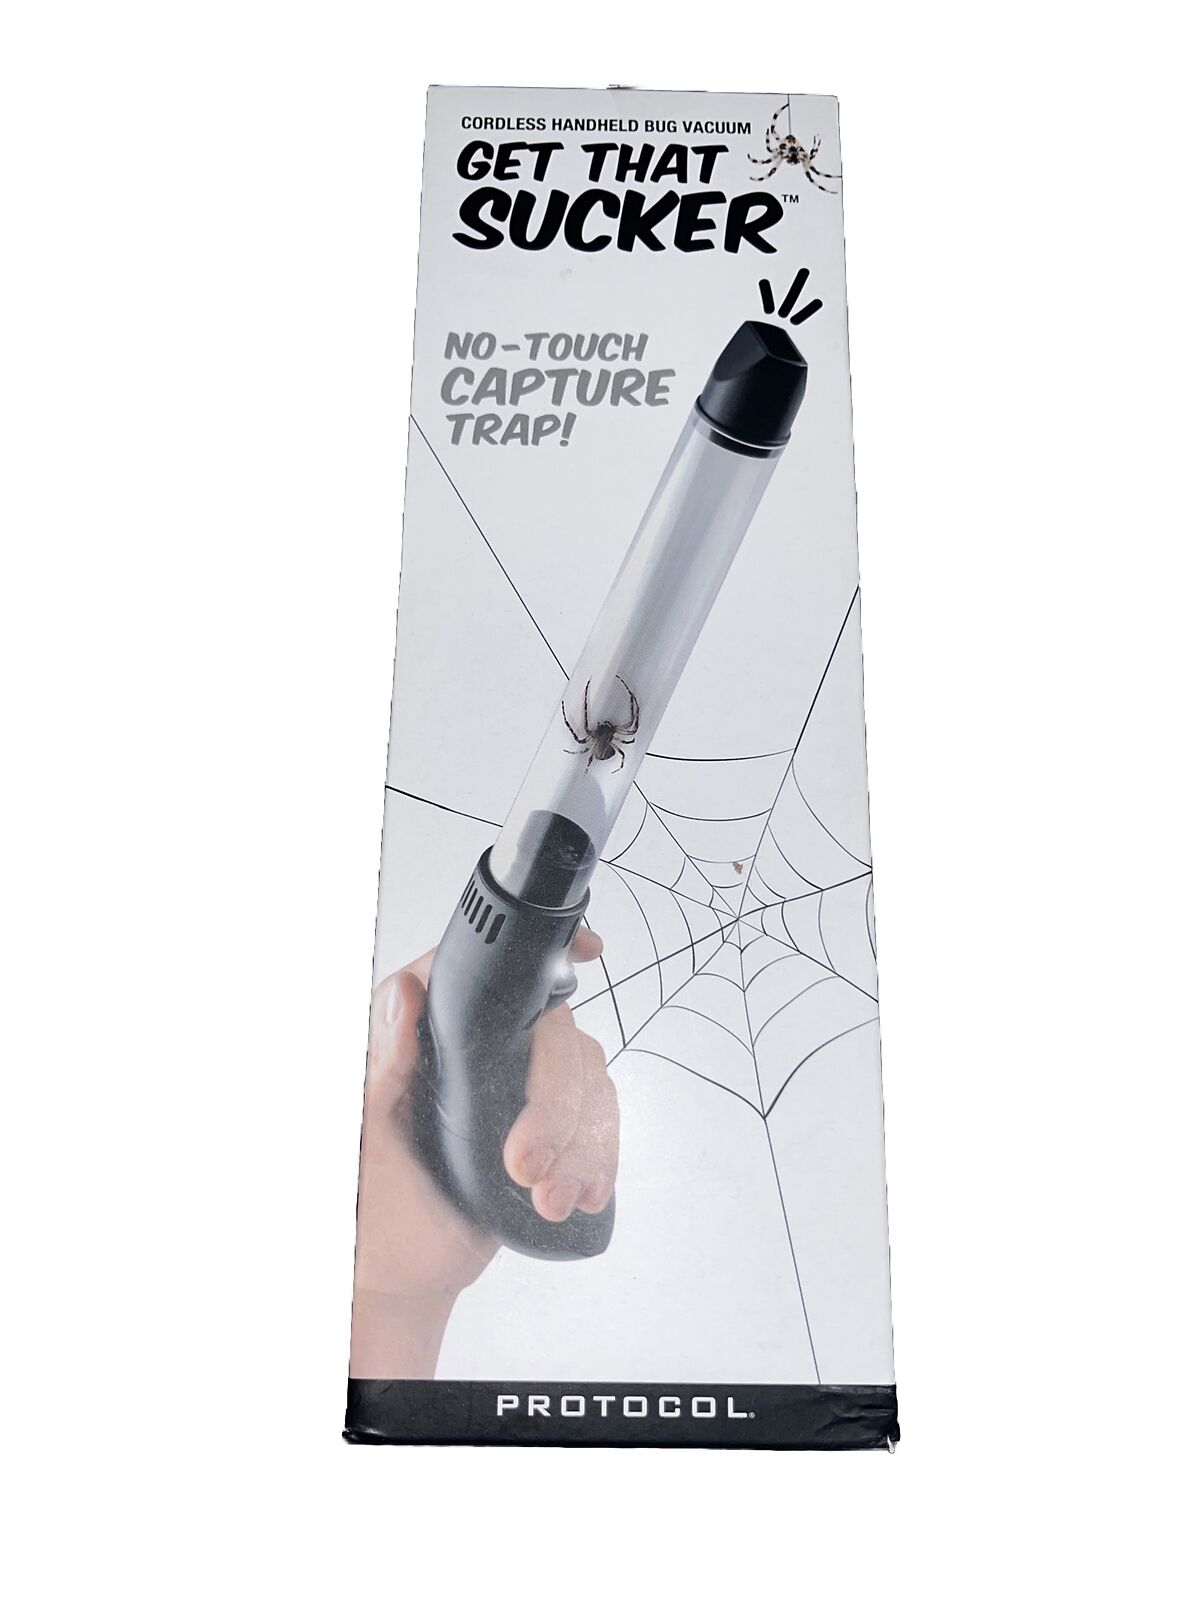 Get That Sucker Cordless Handheld Bug vacuum No Touch Capture Trap As Seen On TV